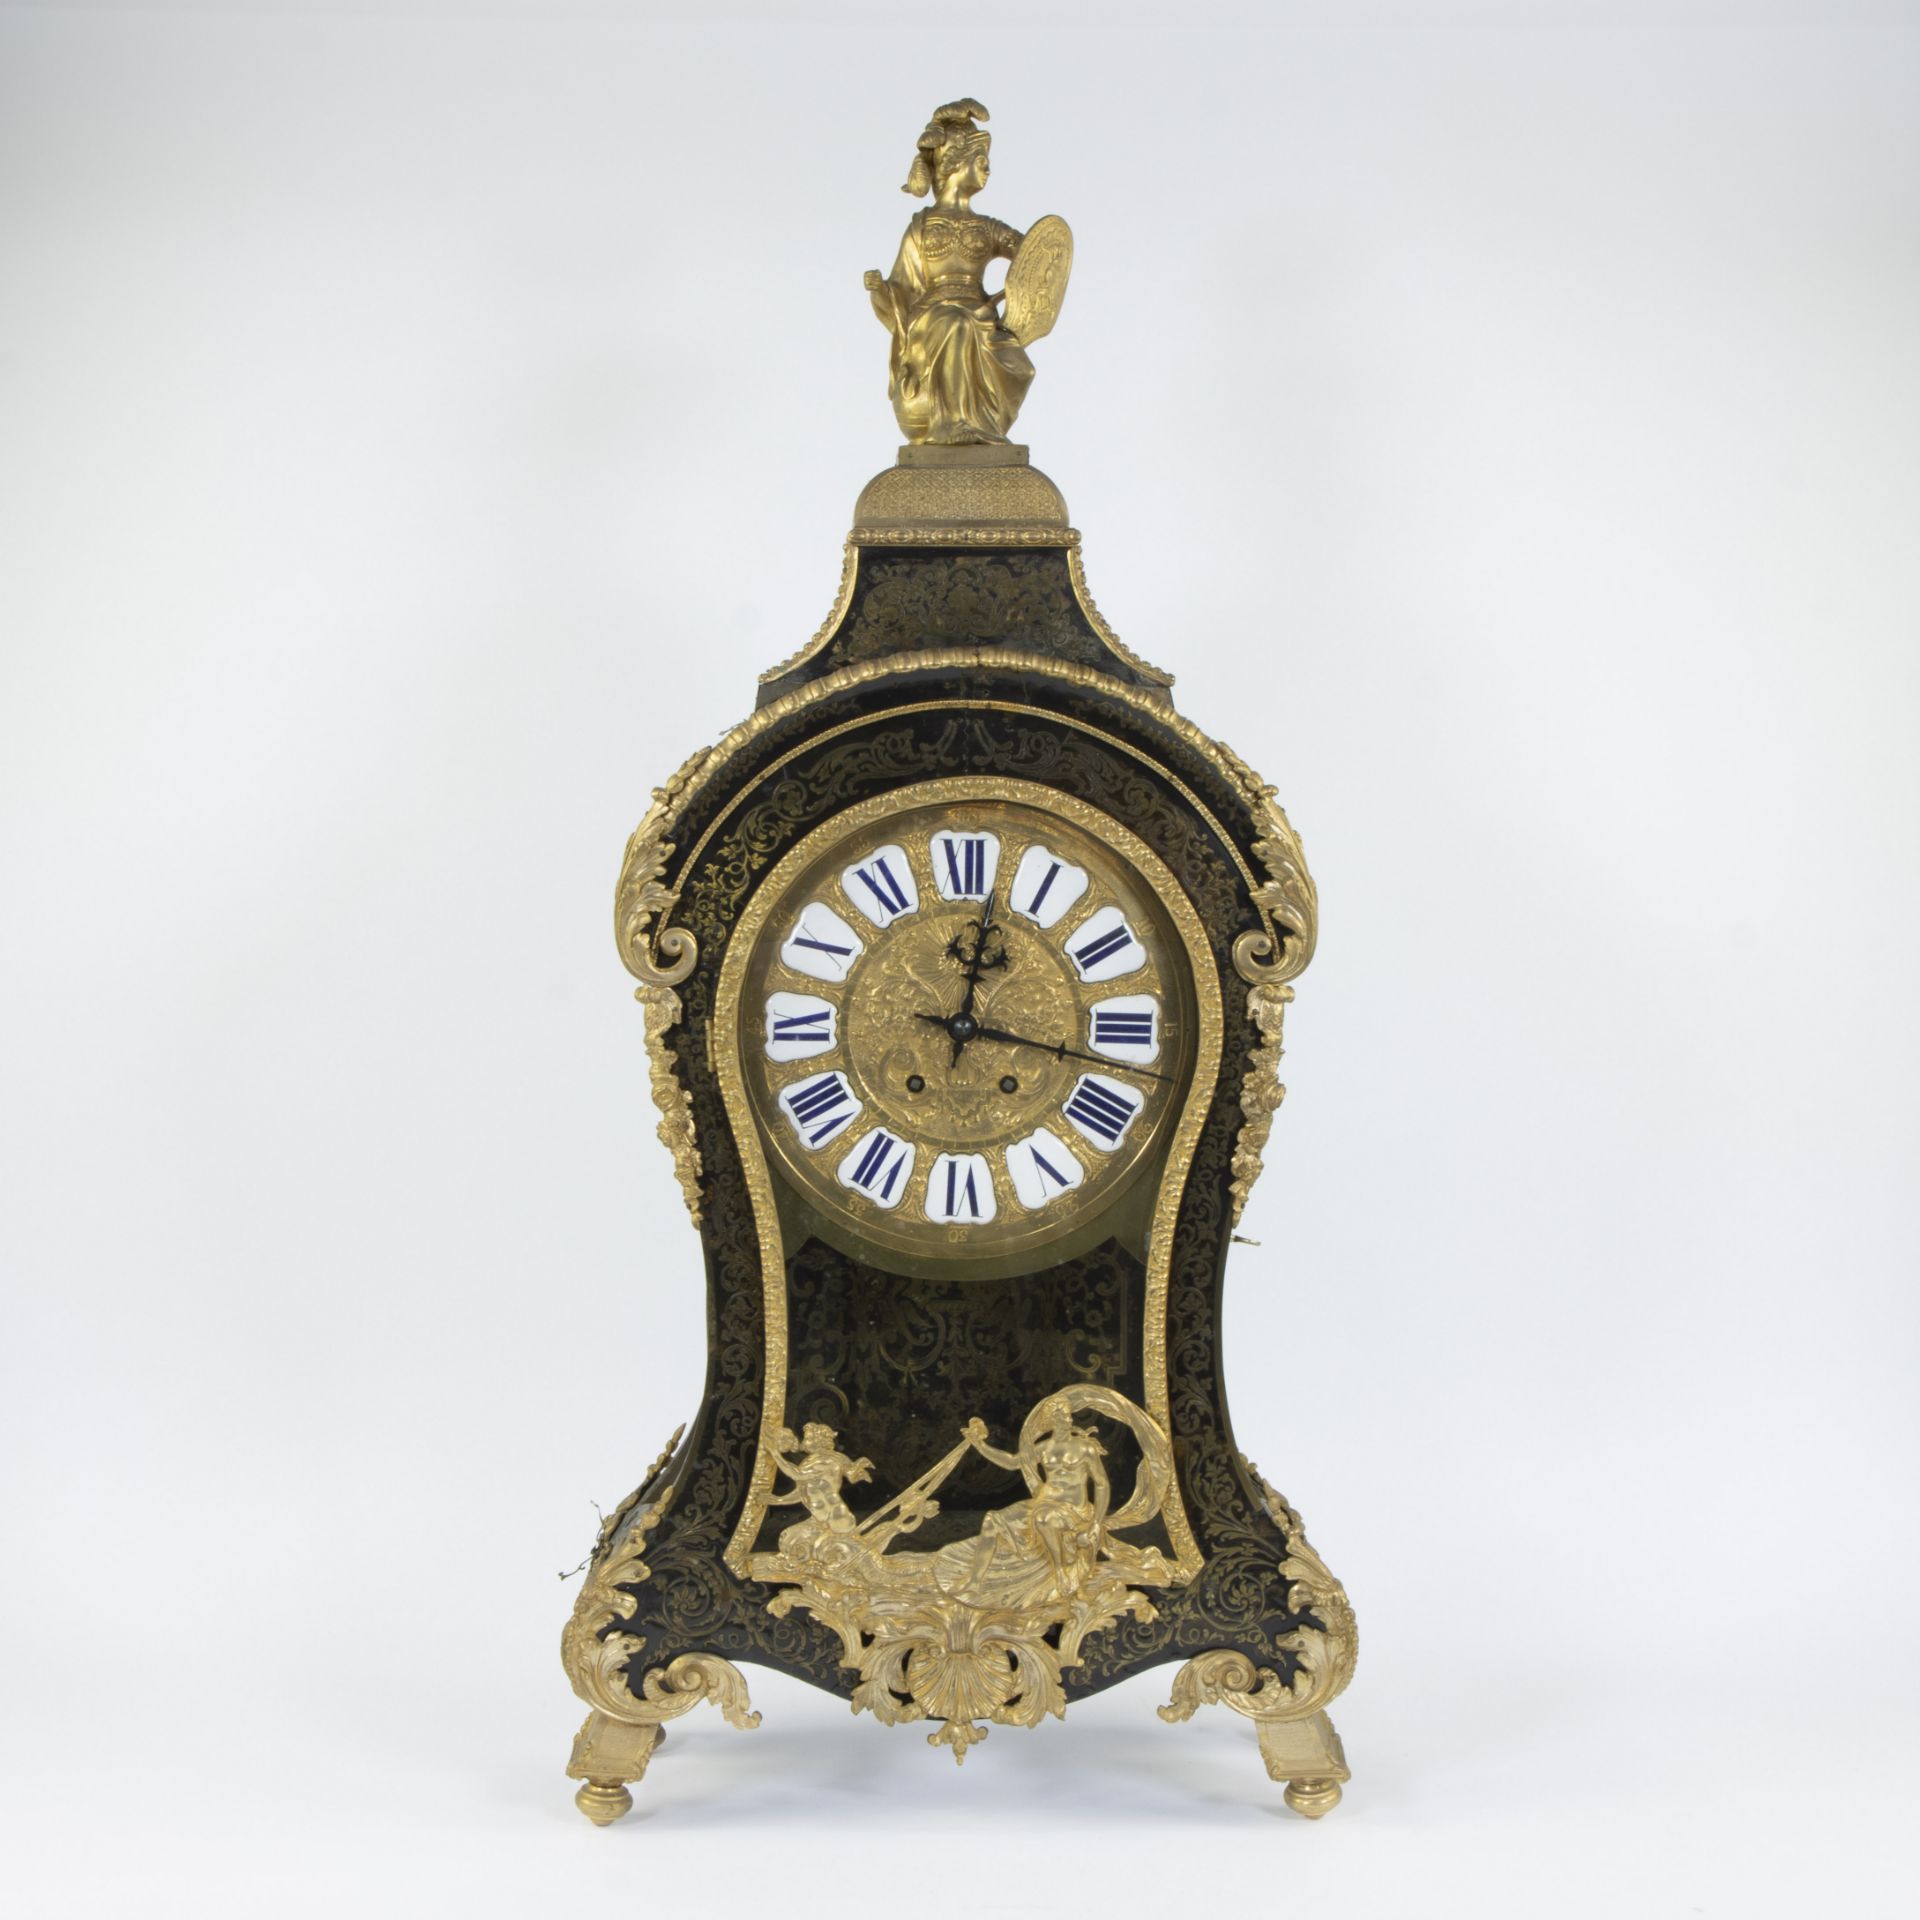 A Louis XV-style cartel clock of black-painted wood decorated with a classical figure and rich gilt